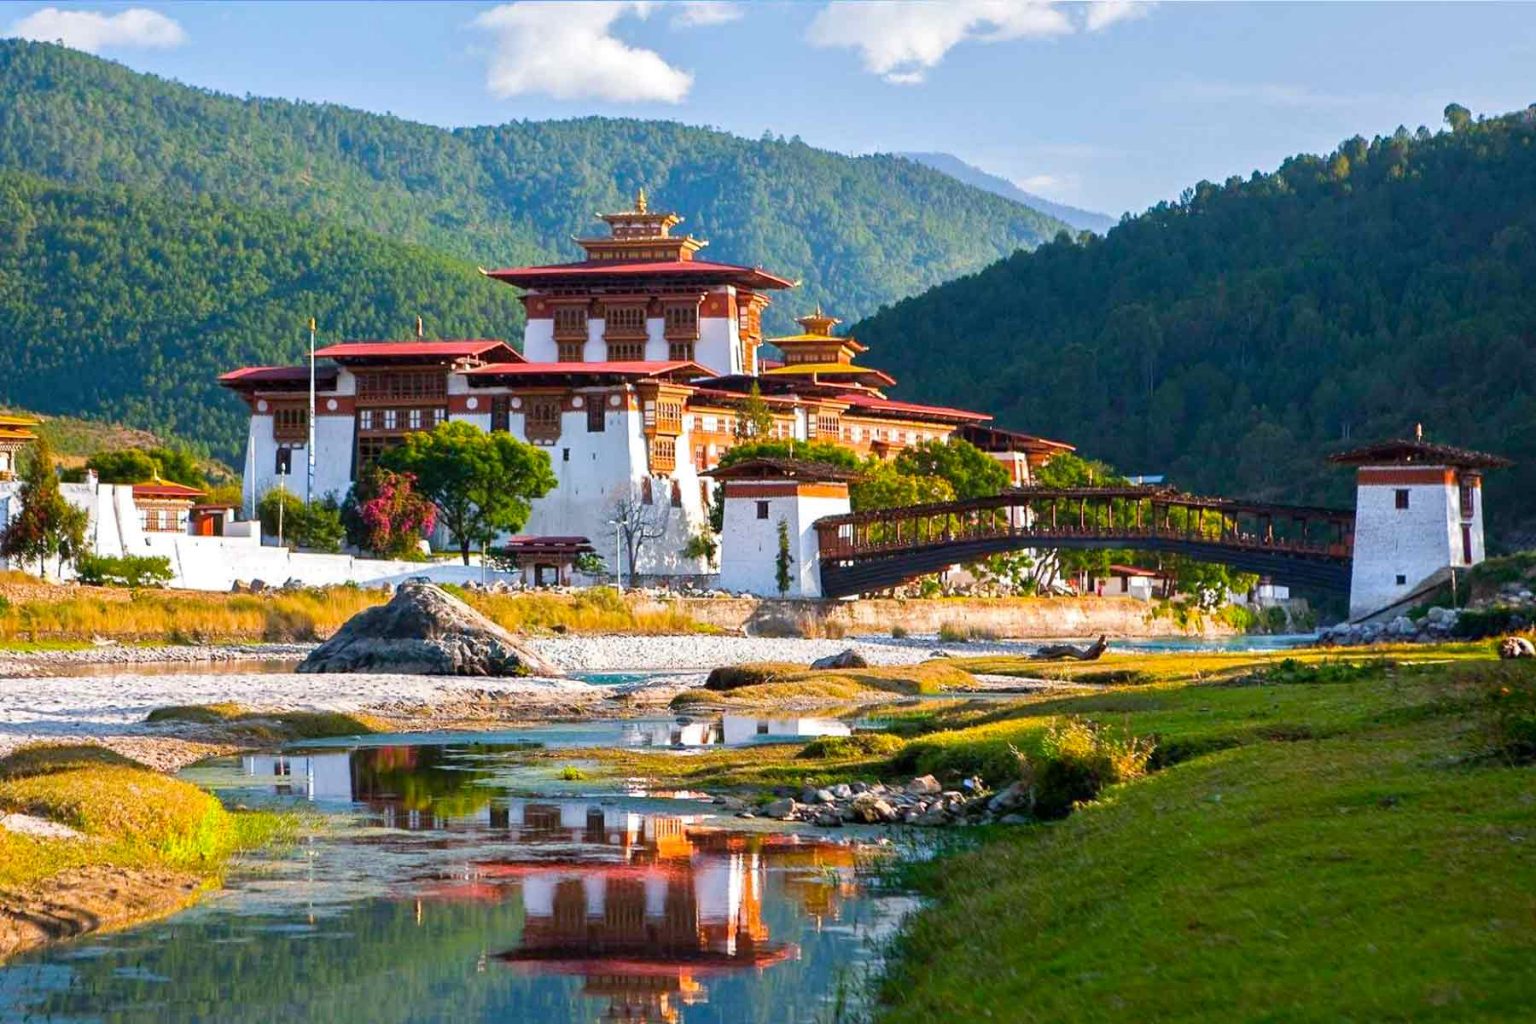 BHUTAN TOUR PACKAGE  “Happiness is a place”  04 Nights / 05 Days | 02 Nights Thimphu + 02 Nights Paro